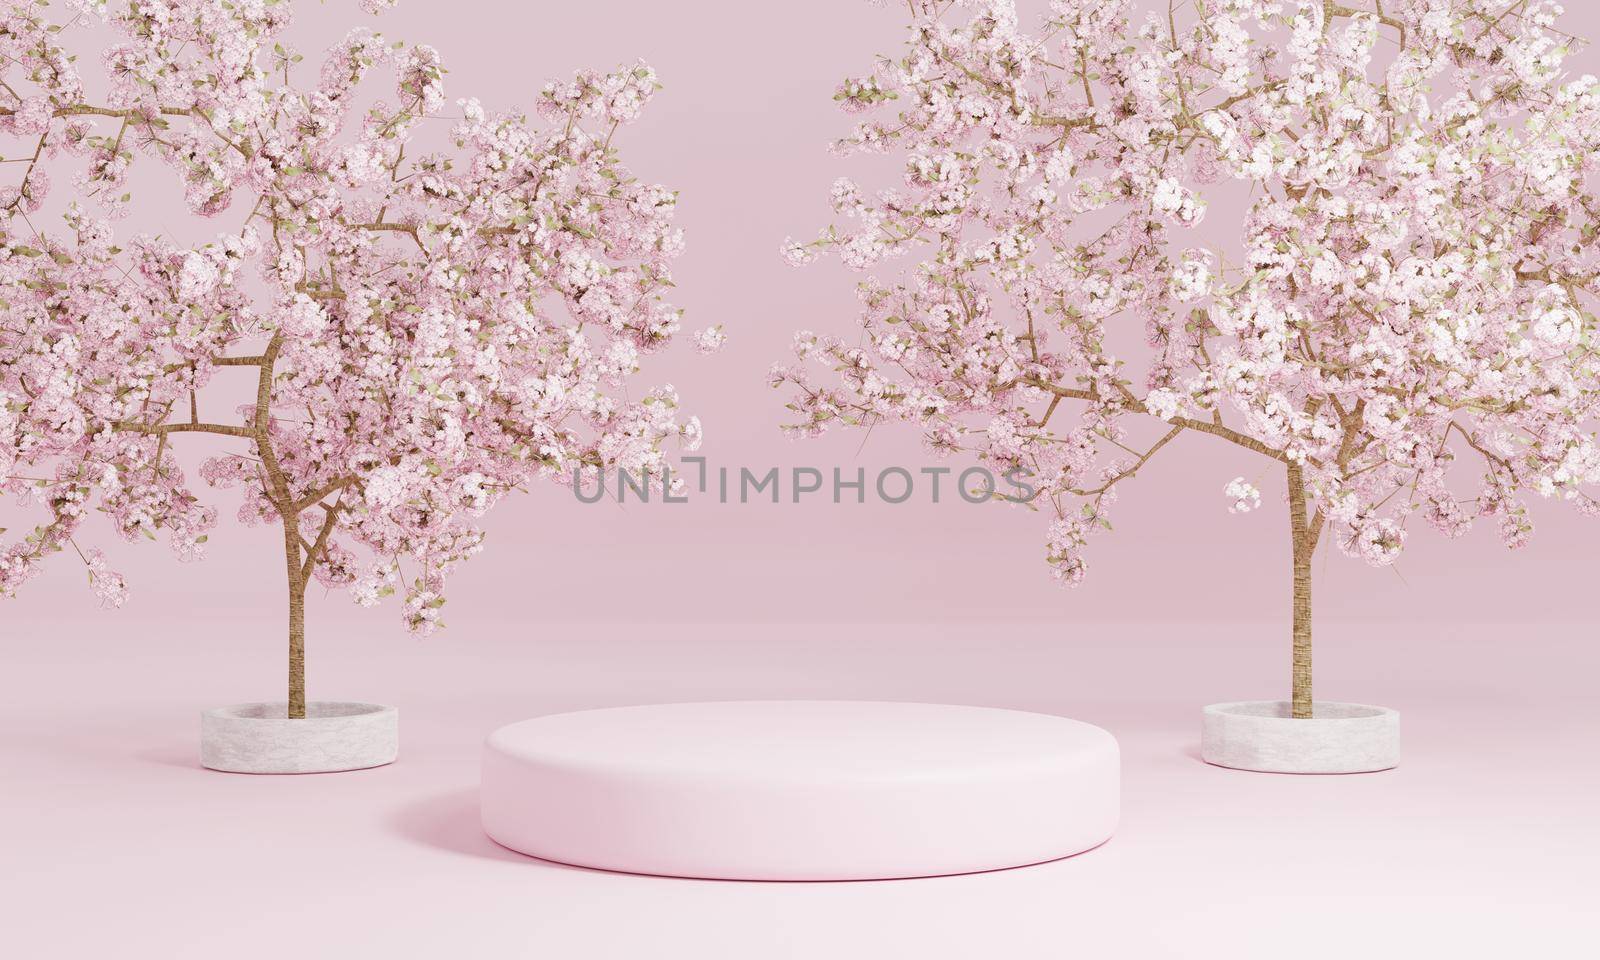 Minimal style cylinder pink product podium showcase with cherry blossom tree or "Sakura" in Japanese language at public garden. Technology and object concept. 3D illustration rendering by MiniStocker